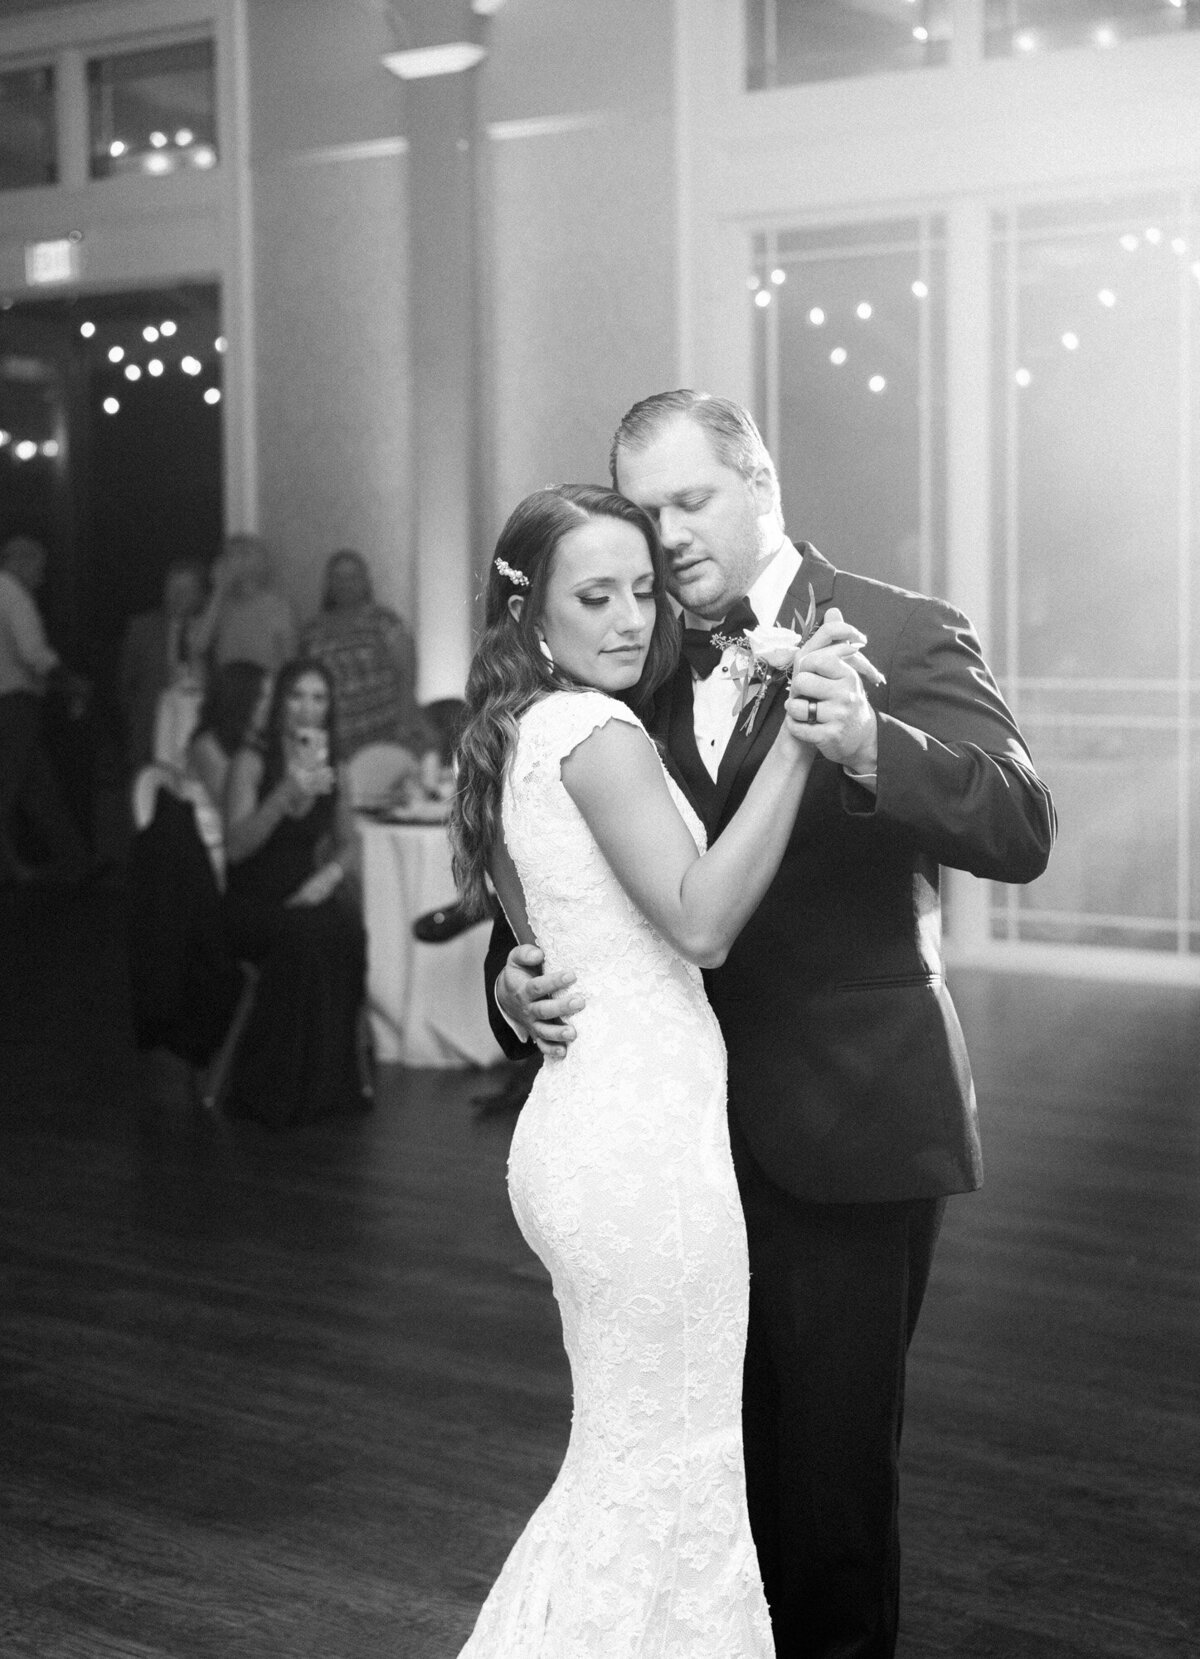 A bride and groom share an intimate first dance in black and white by Huntsville wedding photographer, Kelsey Dawn Photography